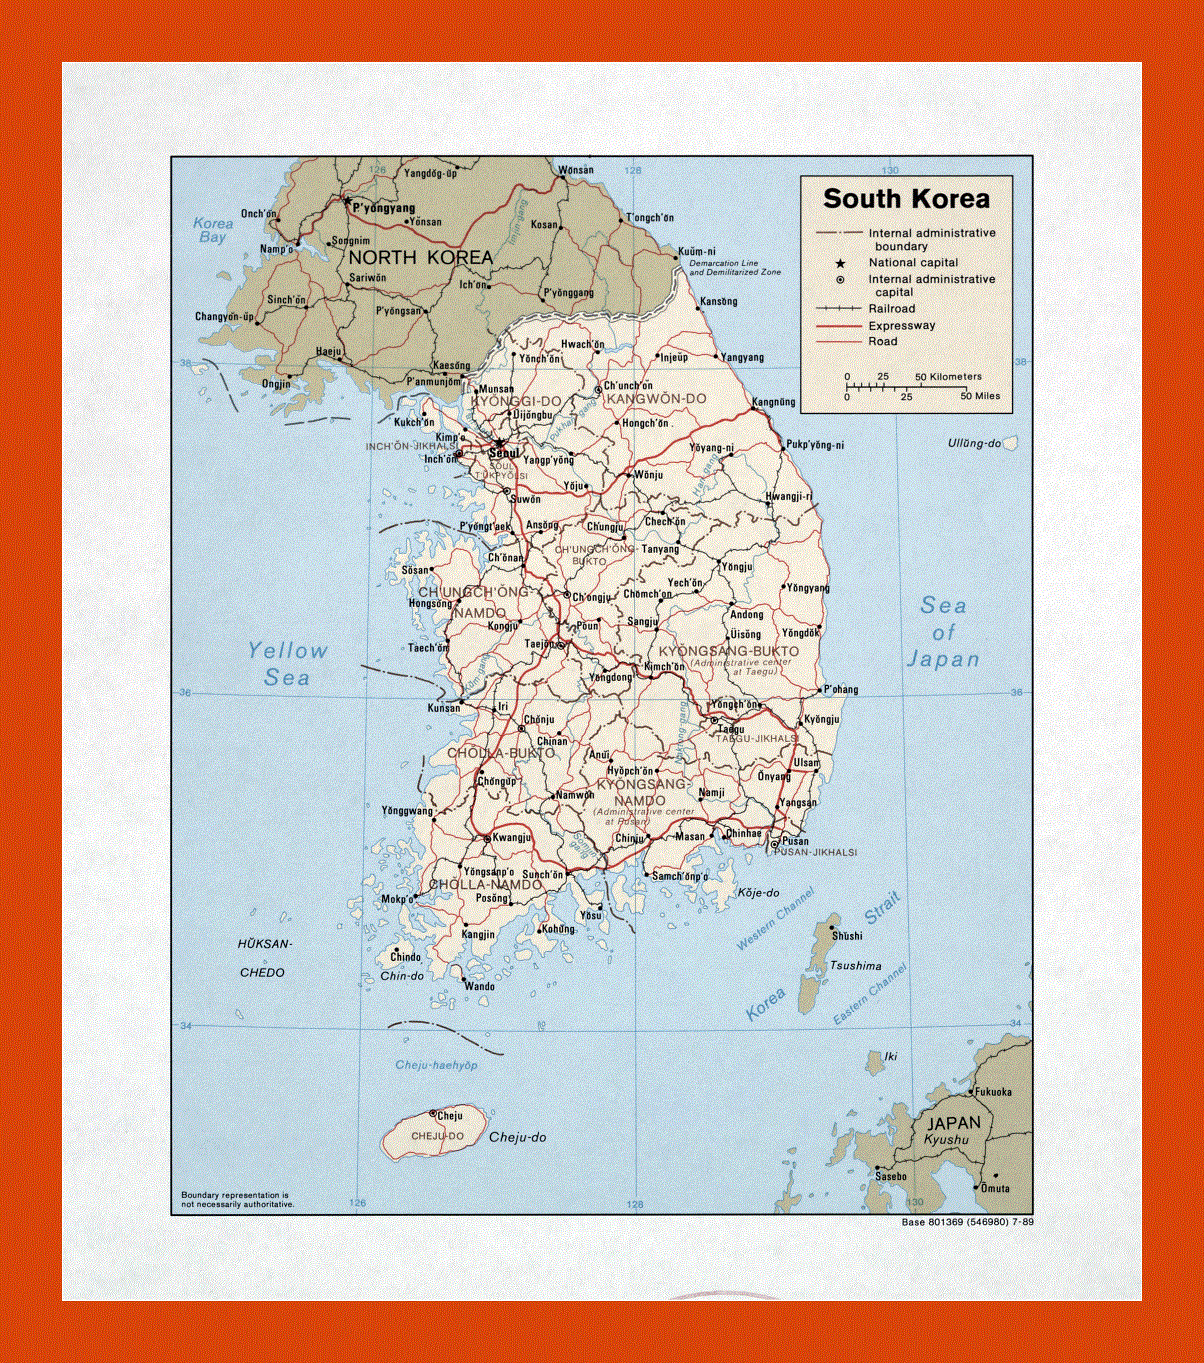 Political and administrative map of South Korea - 1989